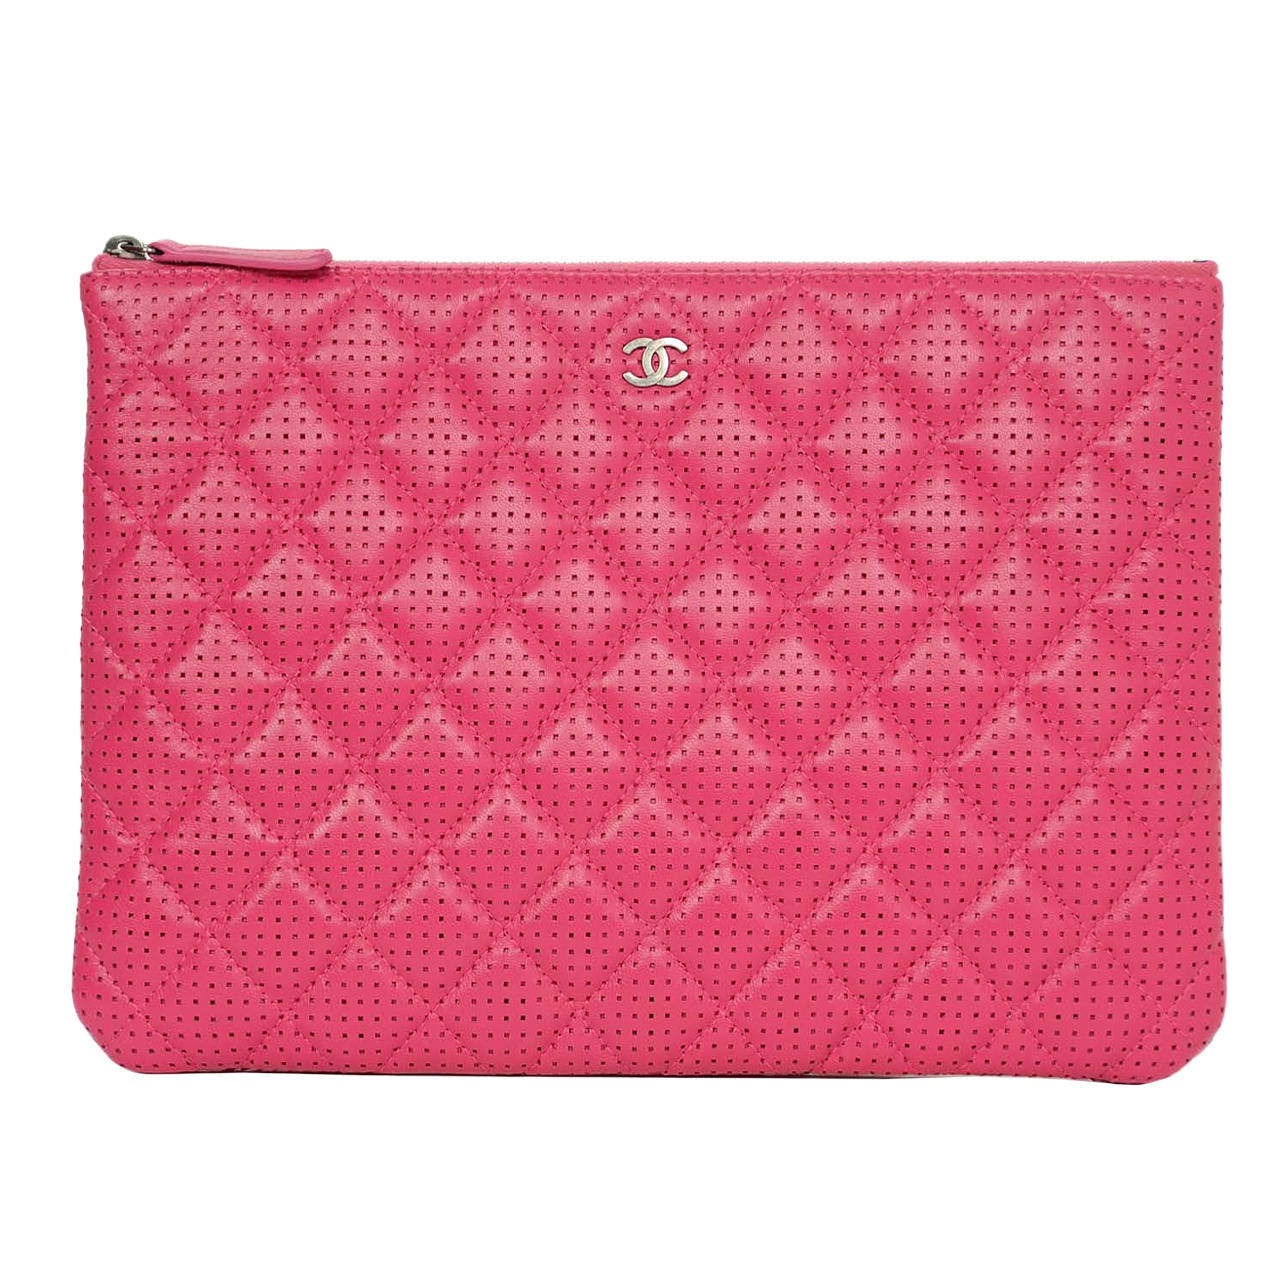 CHANEL 2015 Hot Pink Perforated Lambskin "O Case" Clutch Bag